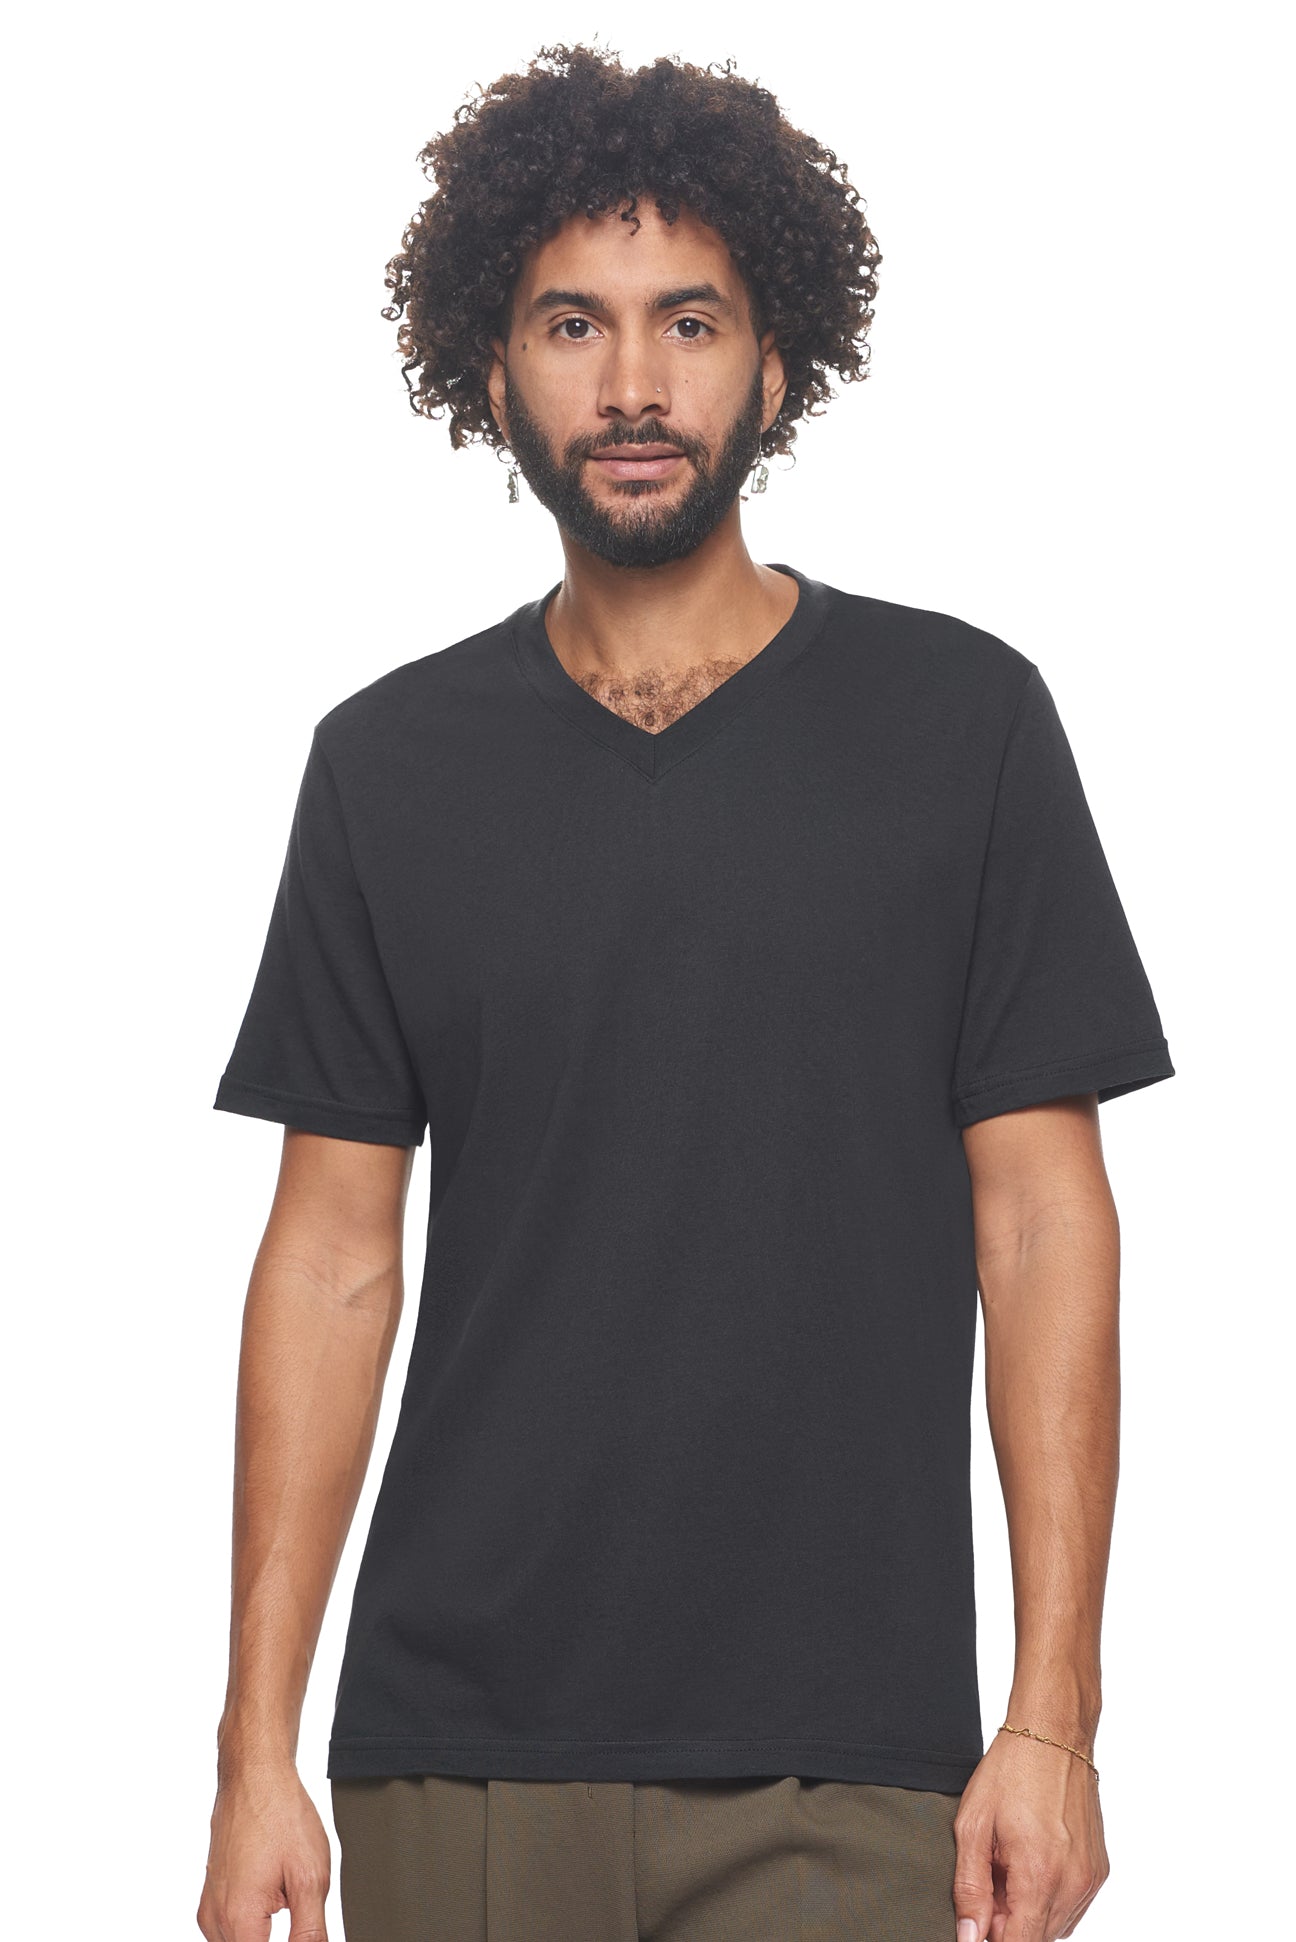 Expert Brand Retail Sustainable Eco-Friendly Apparel Micromodal Cotton Men's V-neck T-Shirt Made in USA black#color_black